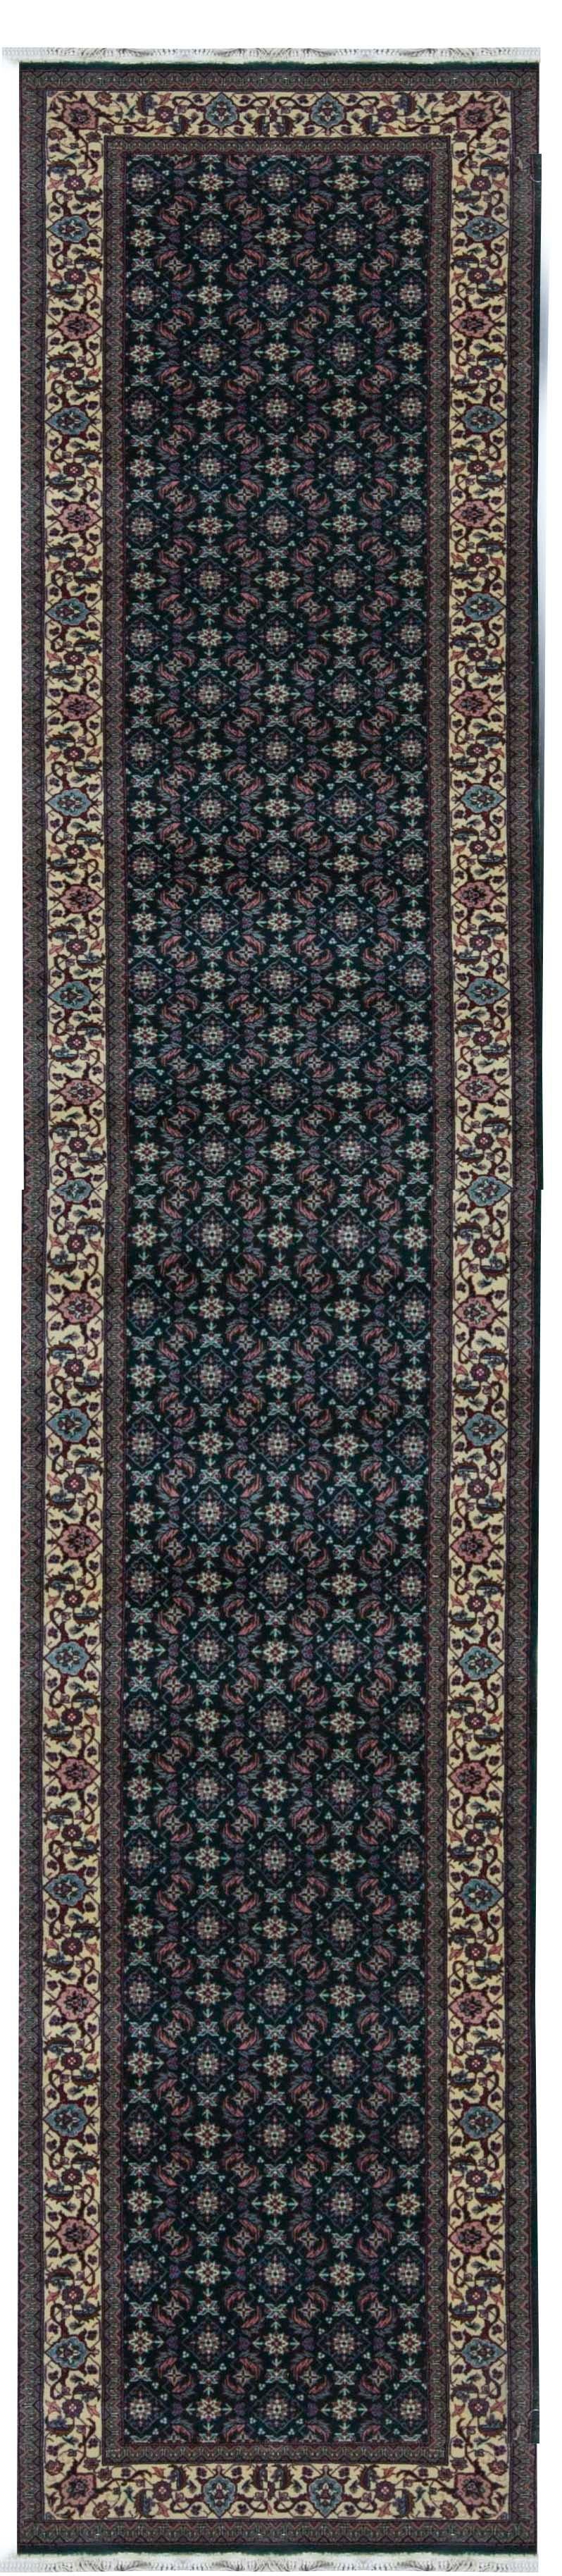 10 x 12 area rugs